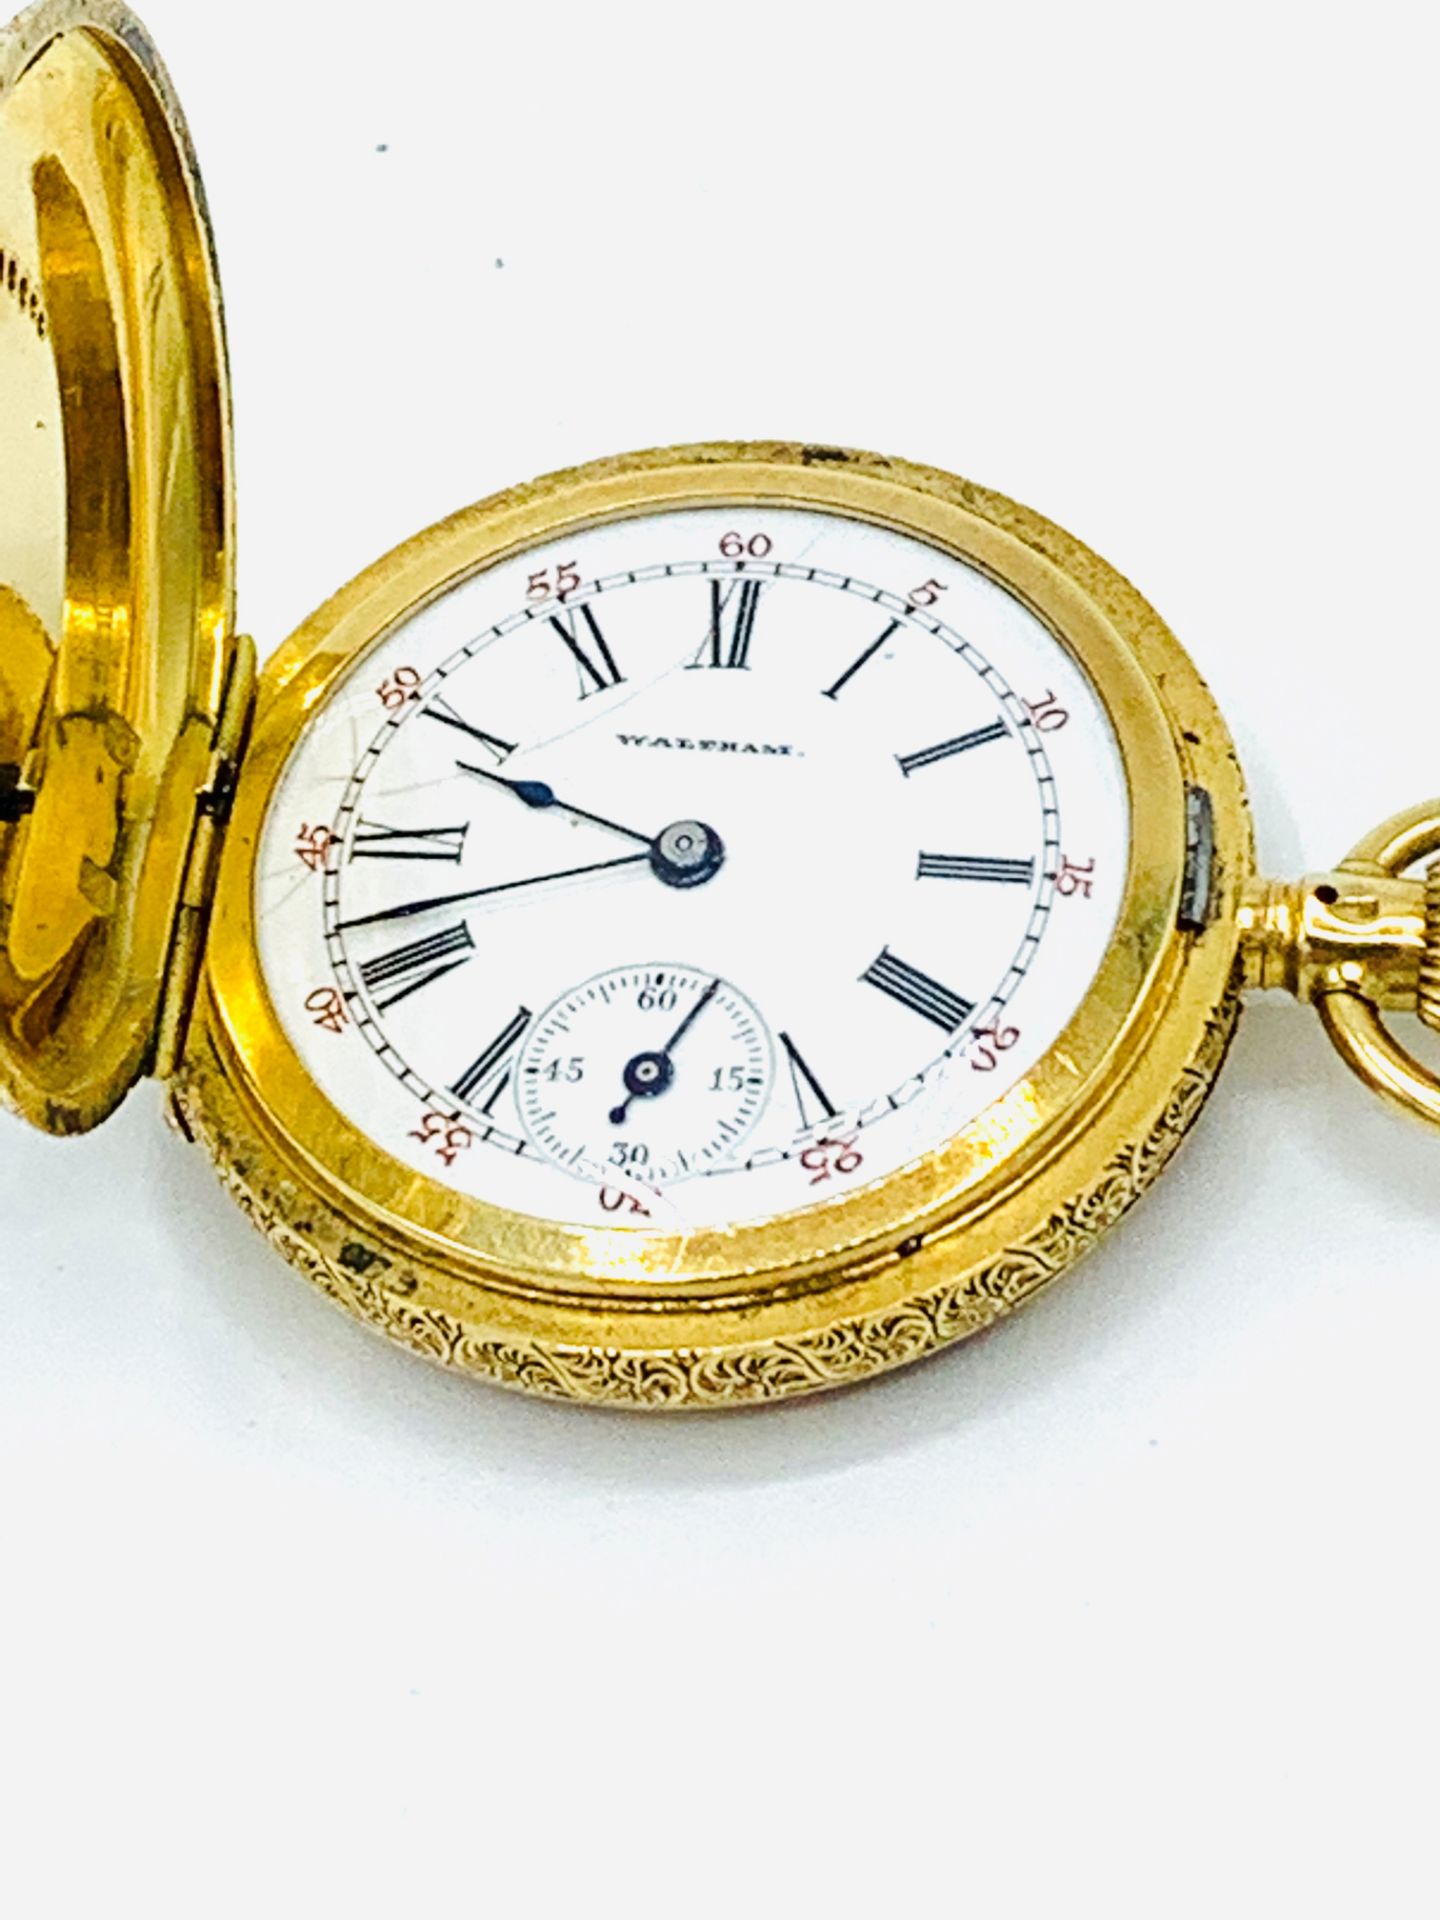 18ct gold small hunter pocket watch, with diamond and enamel cover, by Waltham, Massachusetts - Image 2 of 7